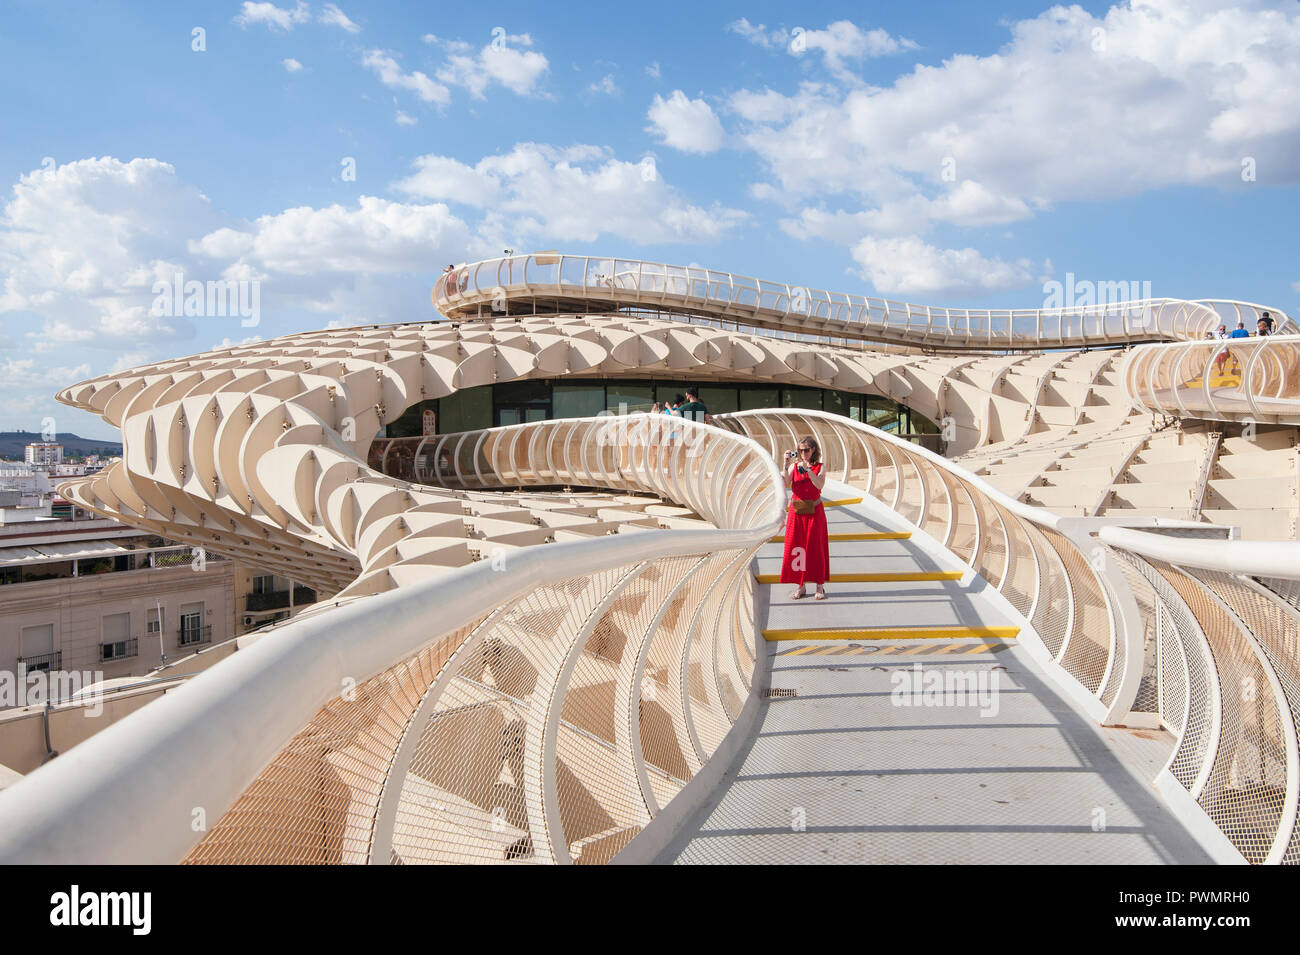 SPAIN, SEVILLE:Metropol Parasol is a wooden structure located at La Encarnación square, in the old quarter of Seville, Spain. It was designed by the G Stock Photo